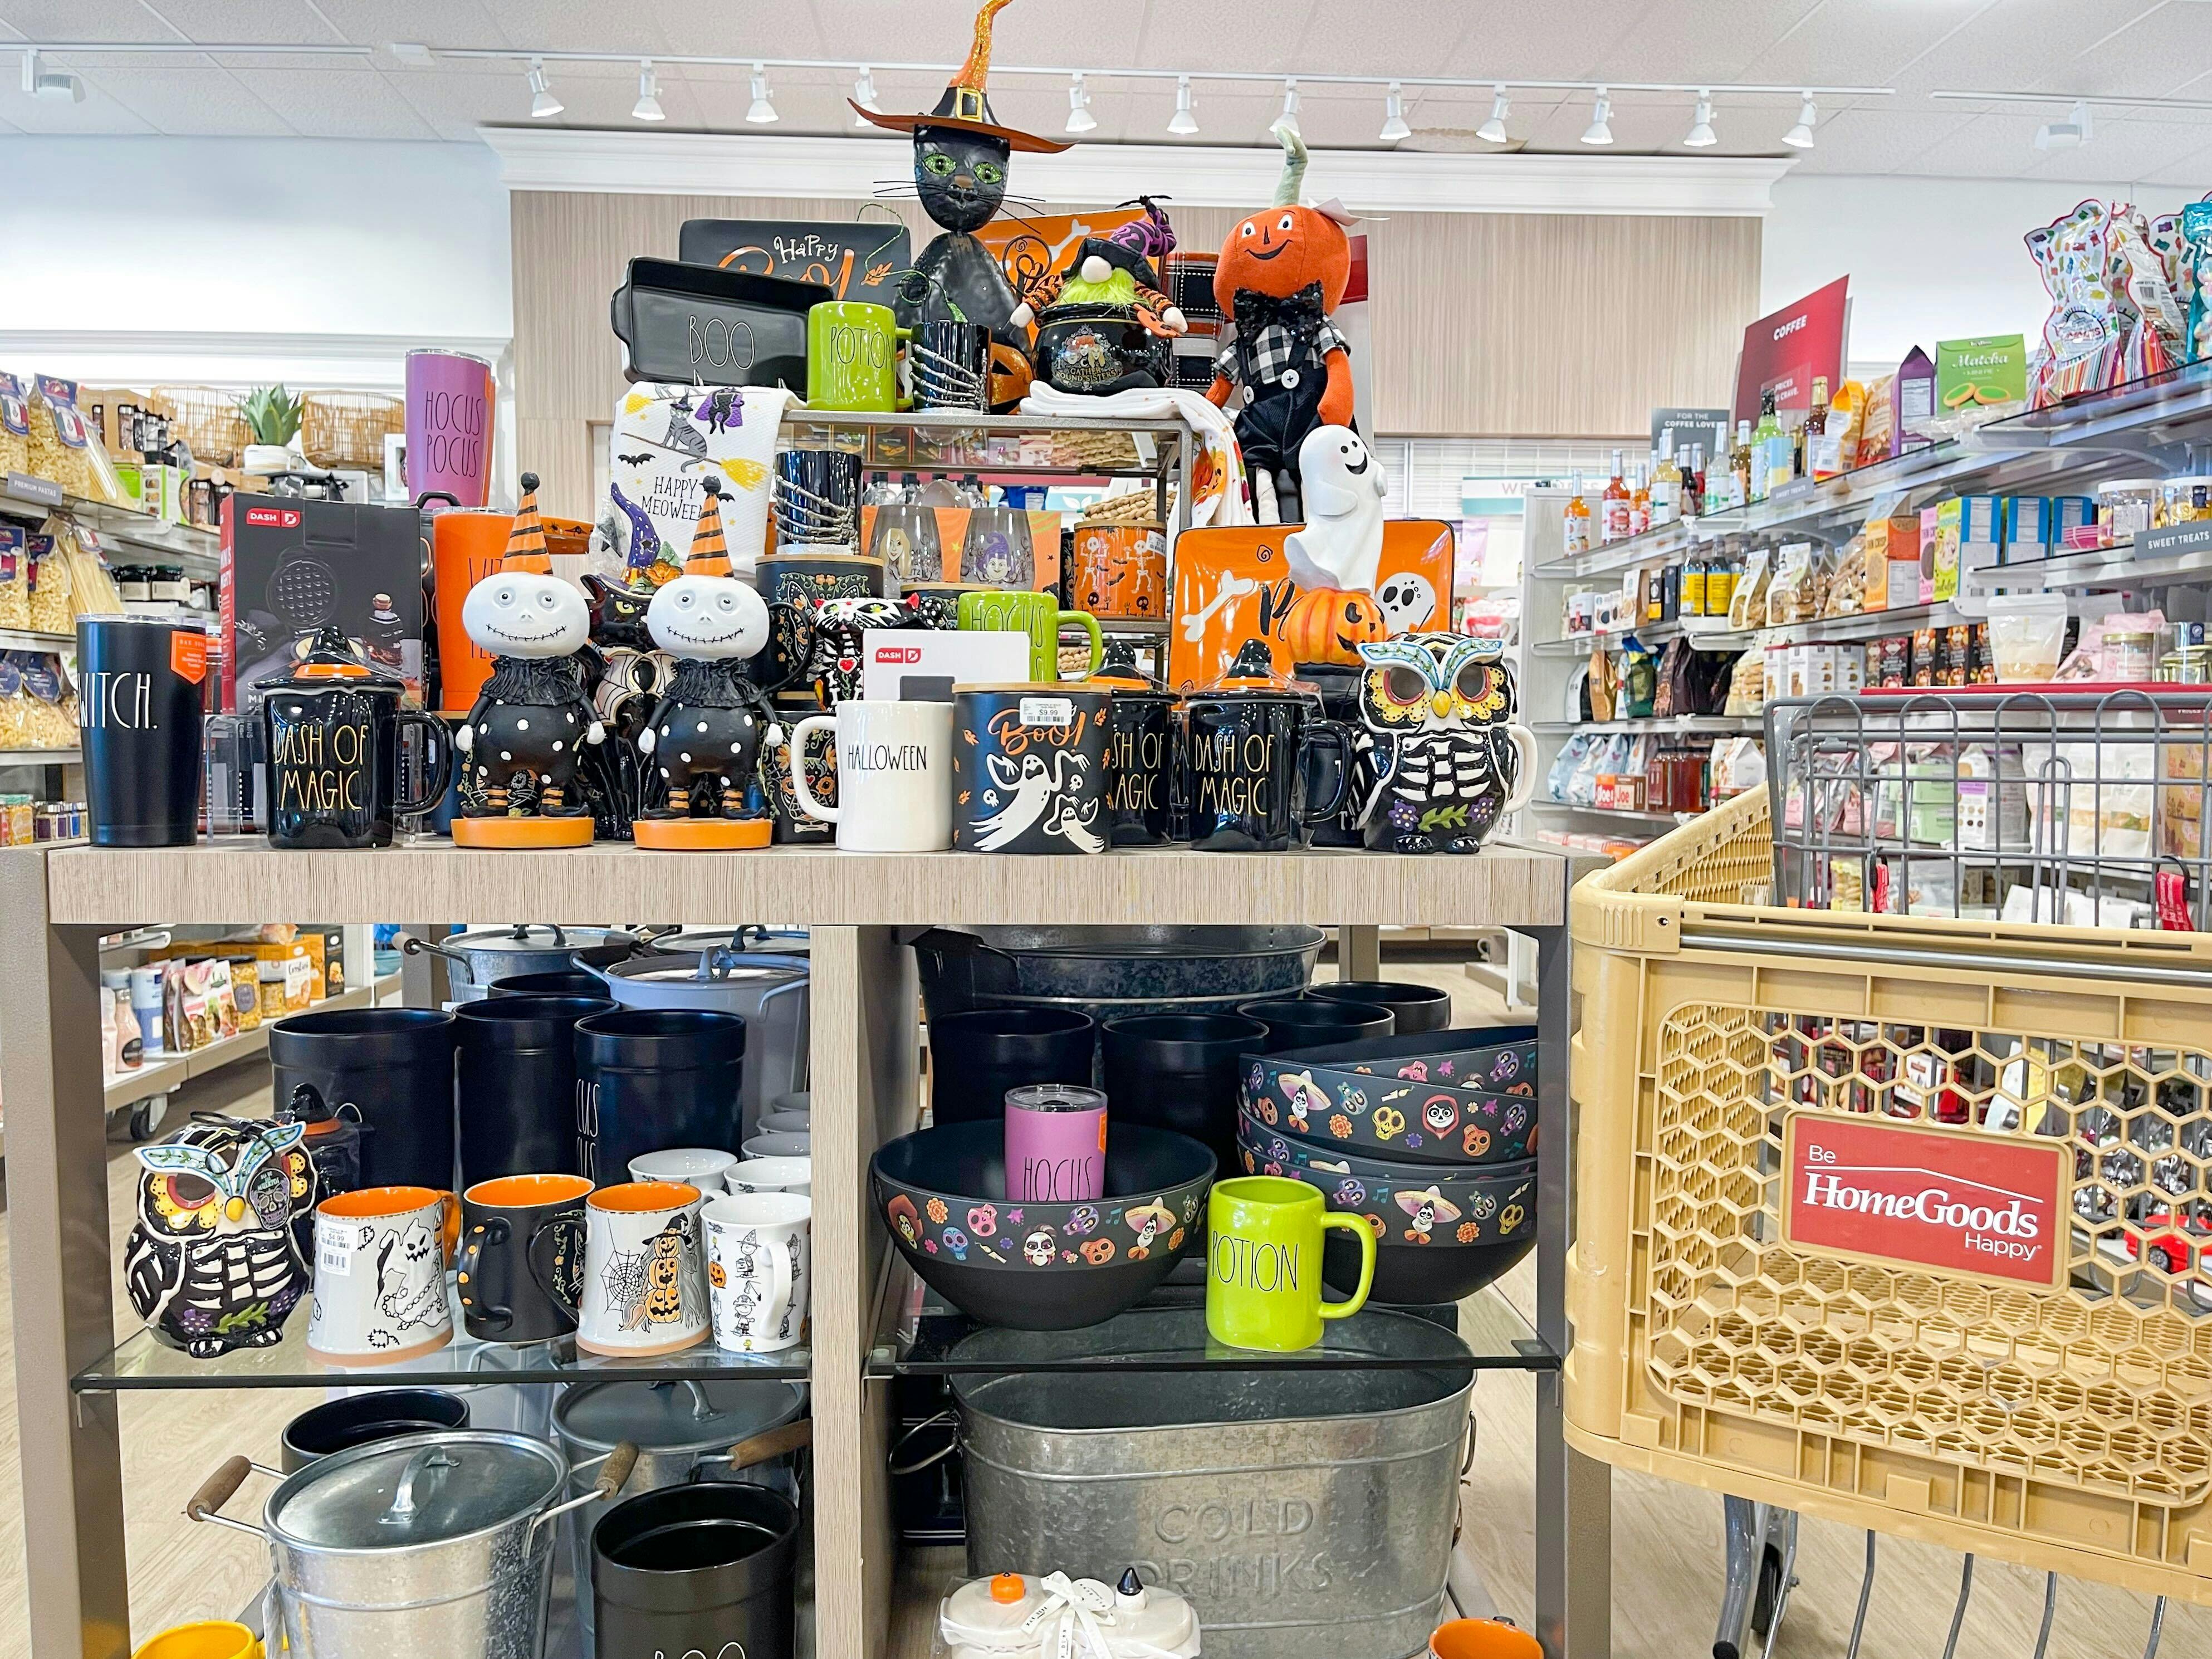 HomeGoods Halloween Decor 2022 Is Here! - The Krazy Coupon Lady